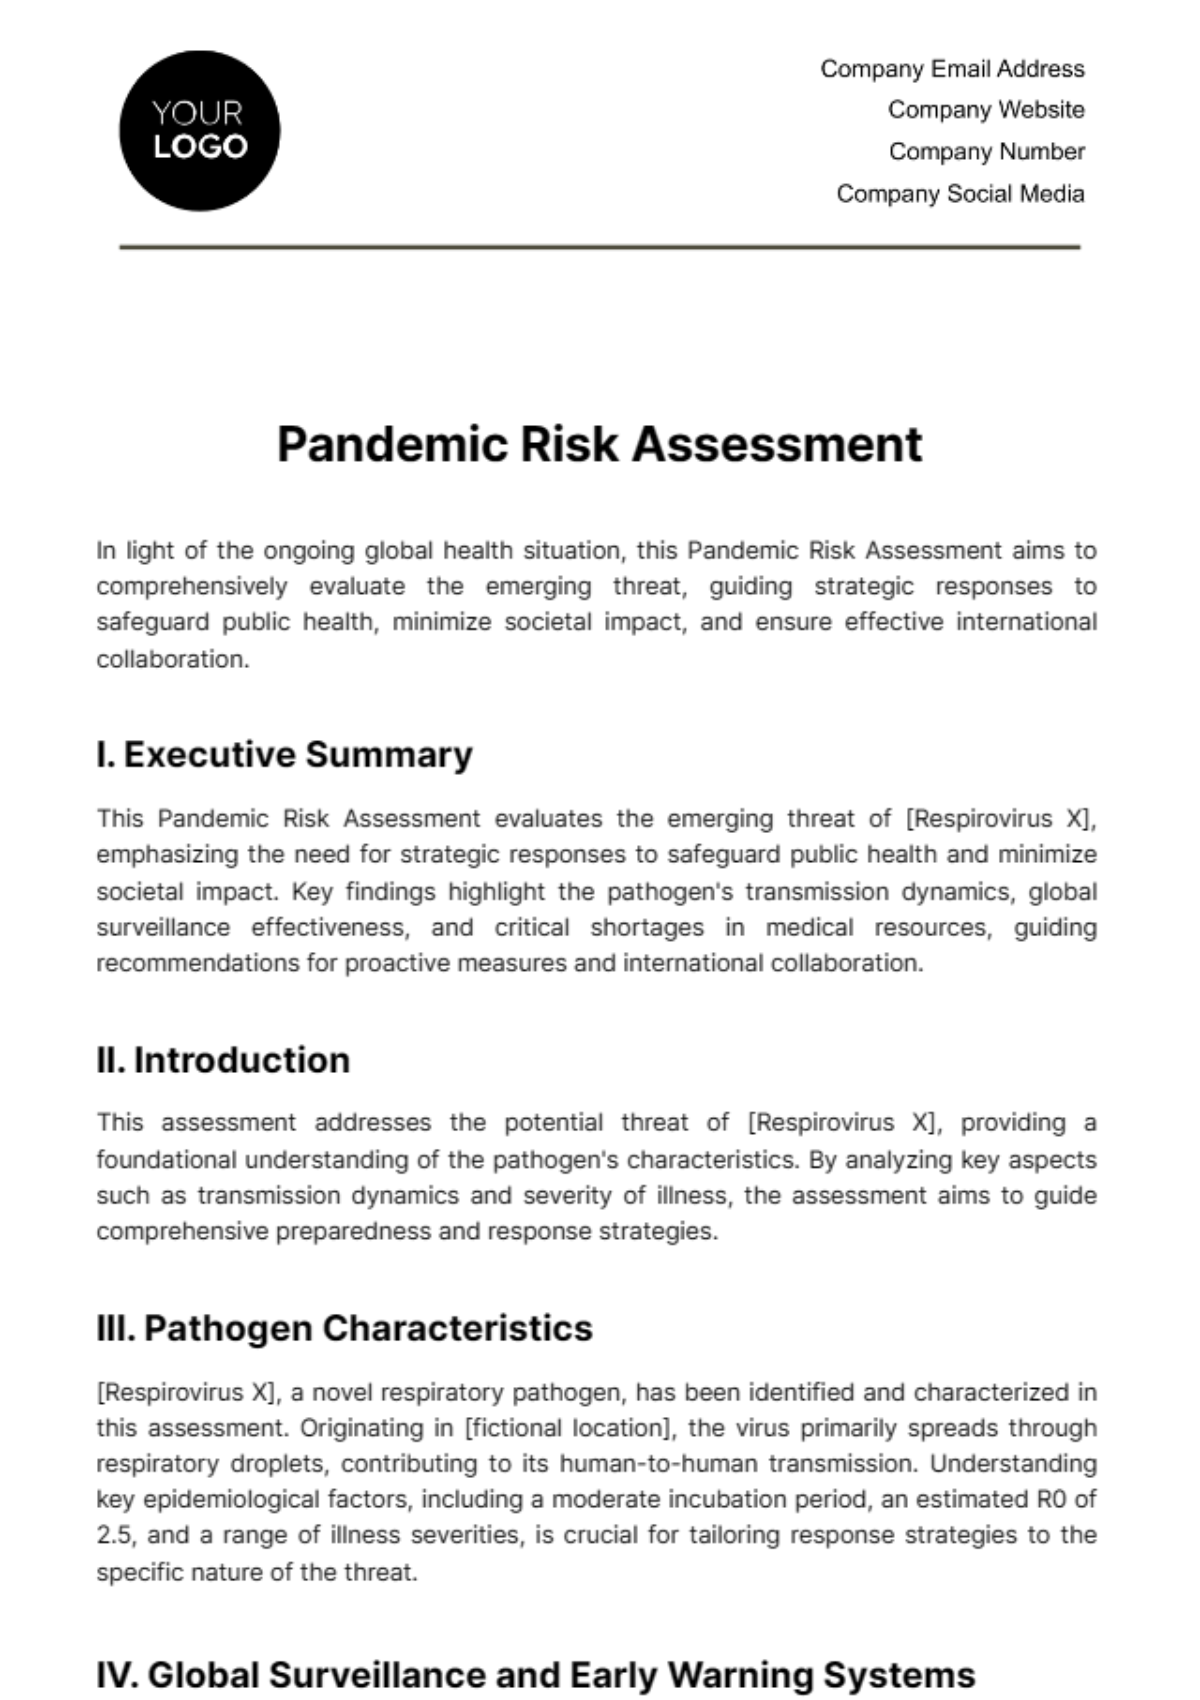 Free Pandemic Risk Assessment Template